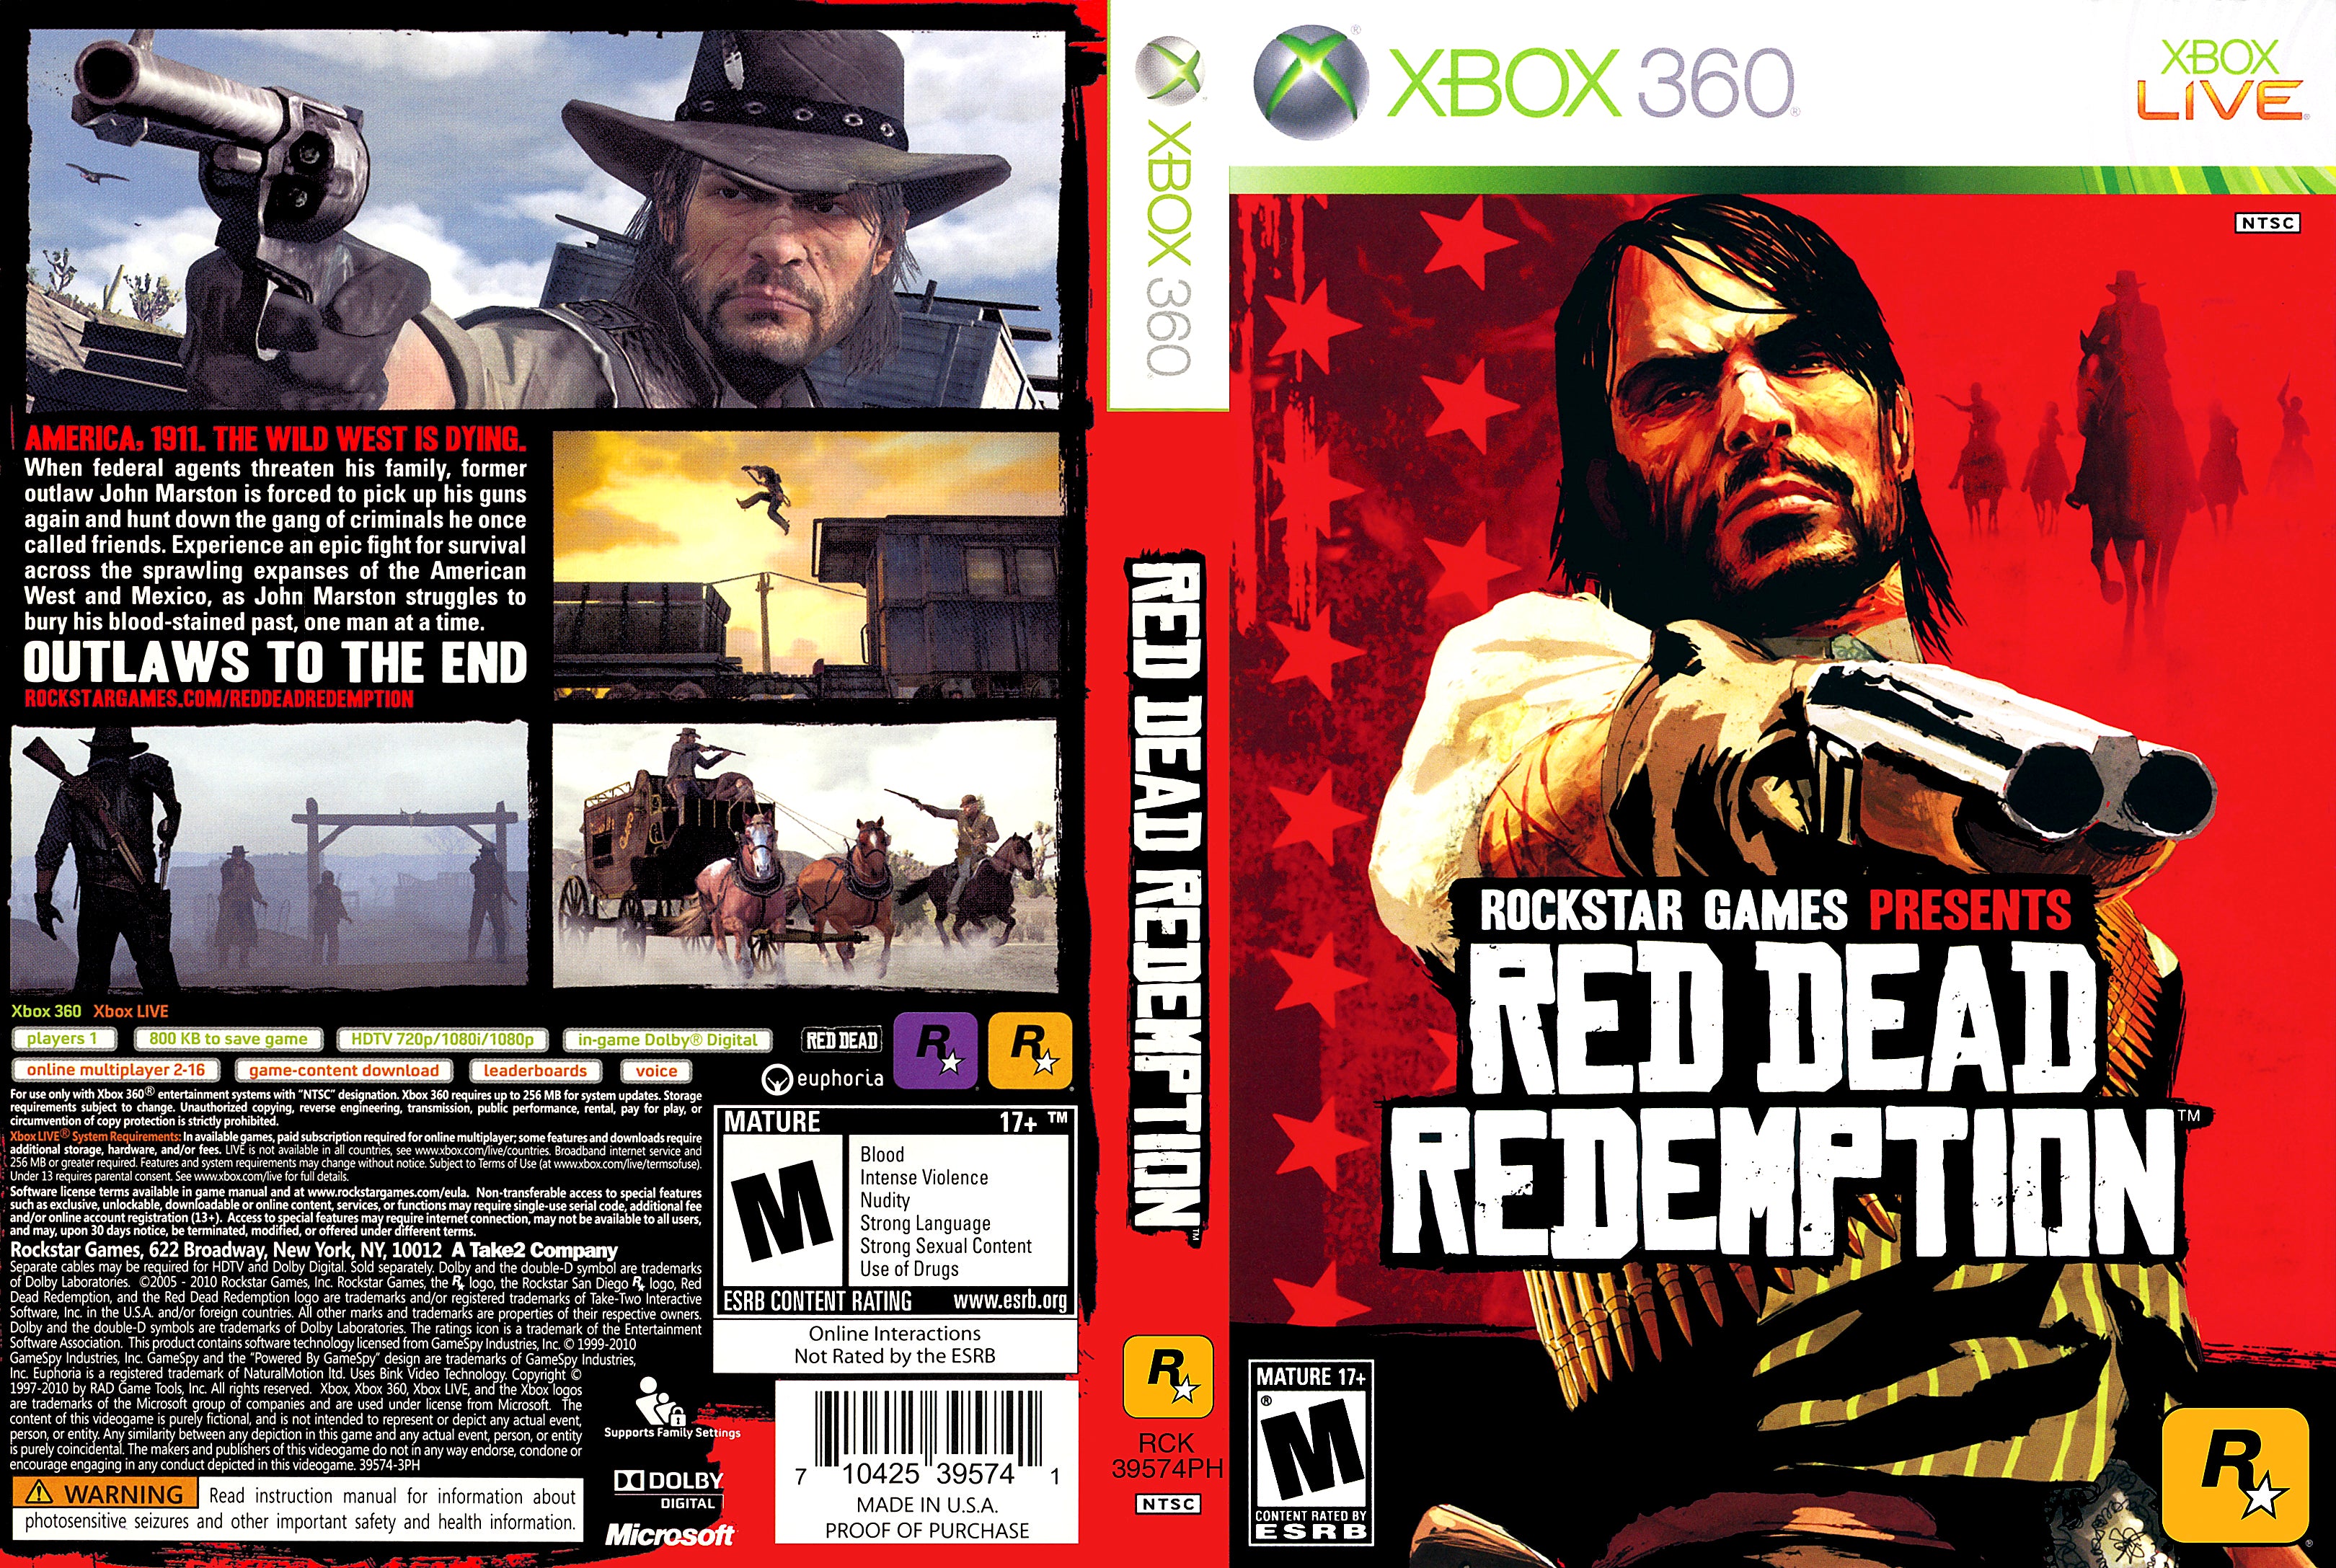 Rdr ps3. Диск на Xbox 360 Red Dead. Red Dead Redemption диск Xbox 360. Red Dead Redemption 1 Xbox 360. Red Dead Redemption 2 Xbox диск.